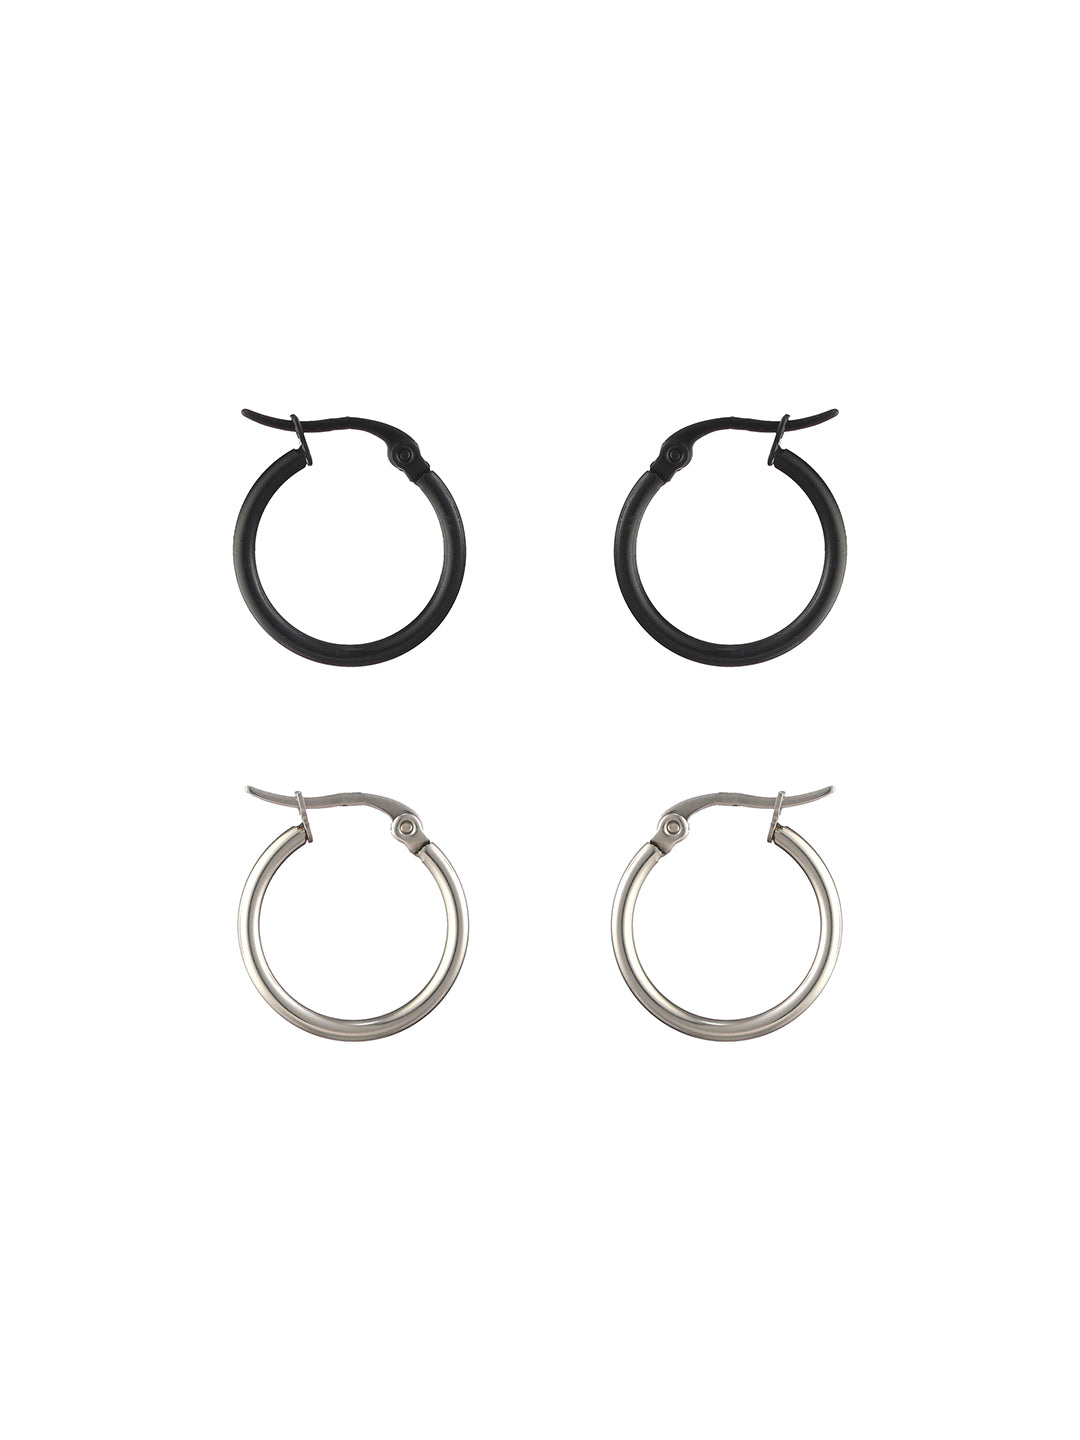 Solid Silver and Black Hoop Earring Set of 2